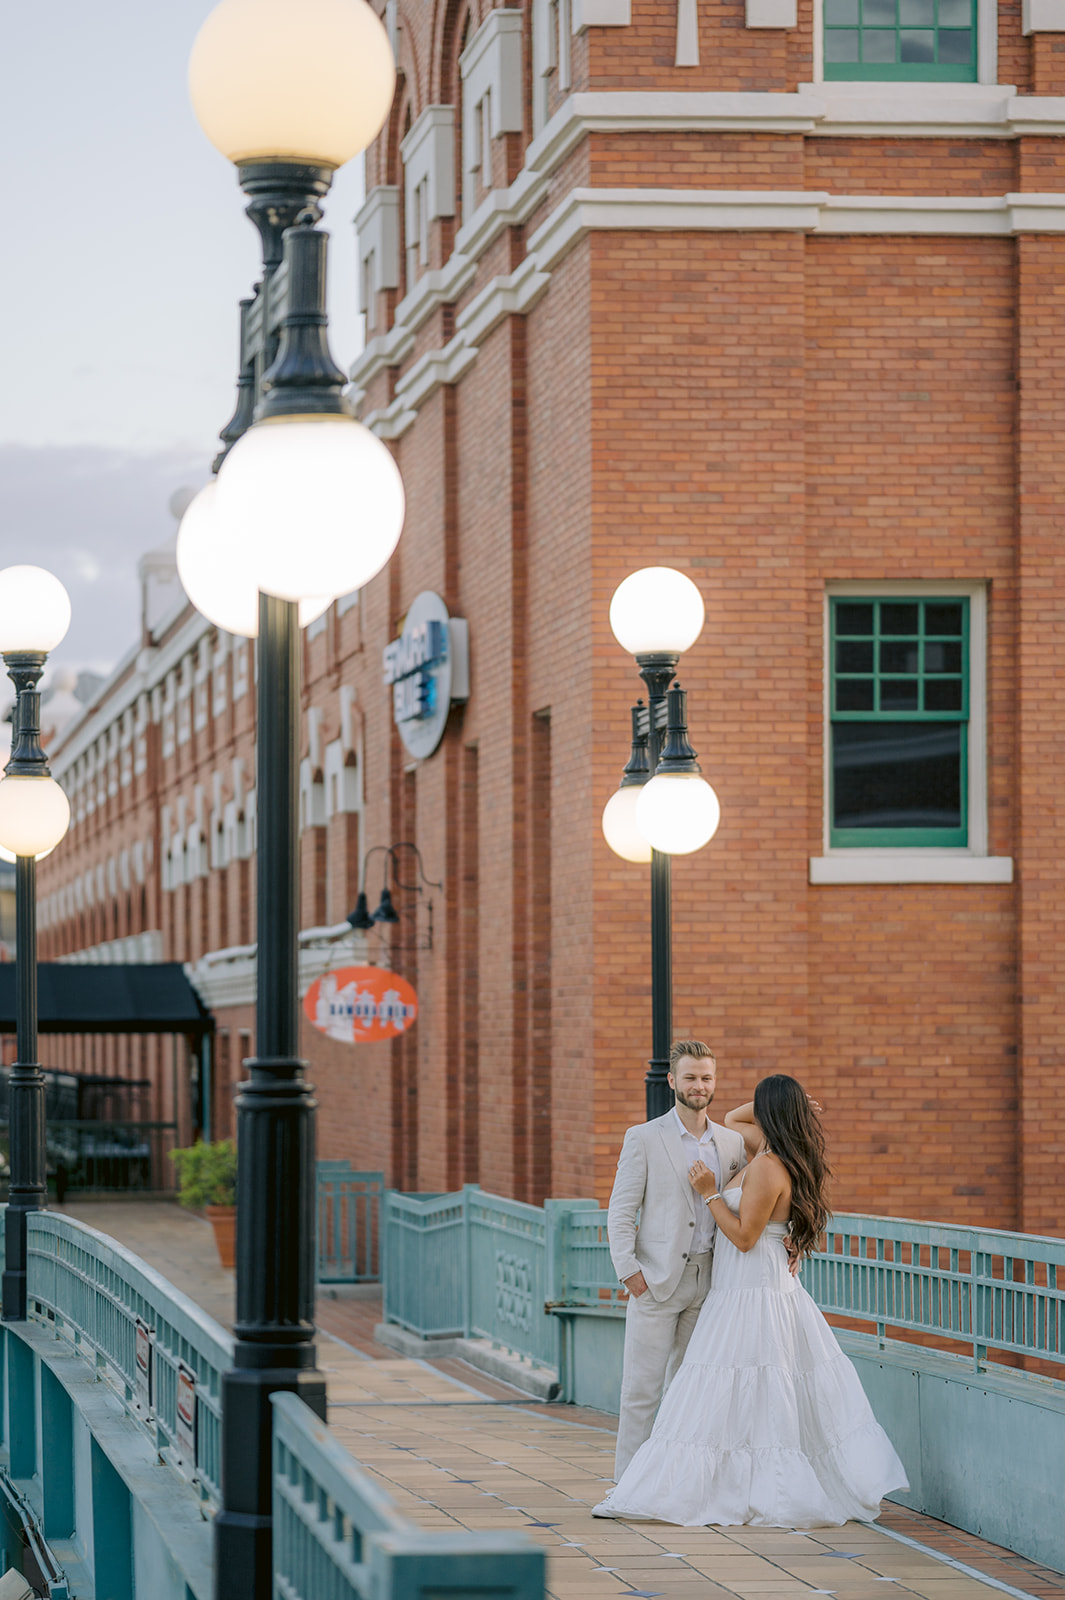 "Romantic glance shared between Hailey and Jeff in Ybor City, Tampa"
